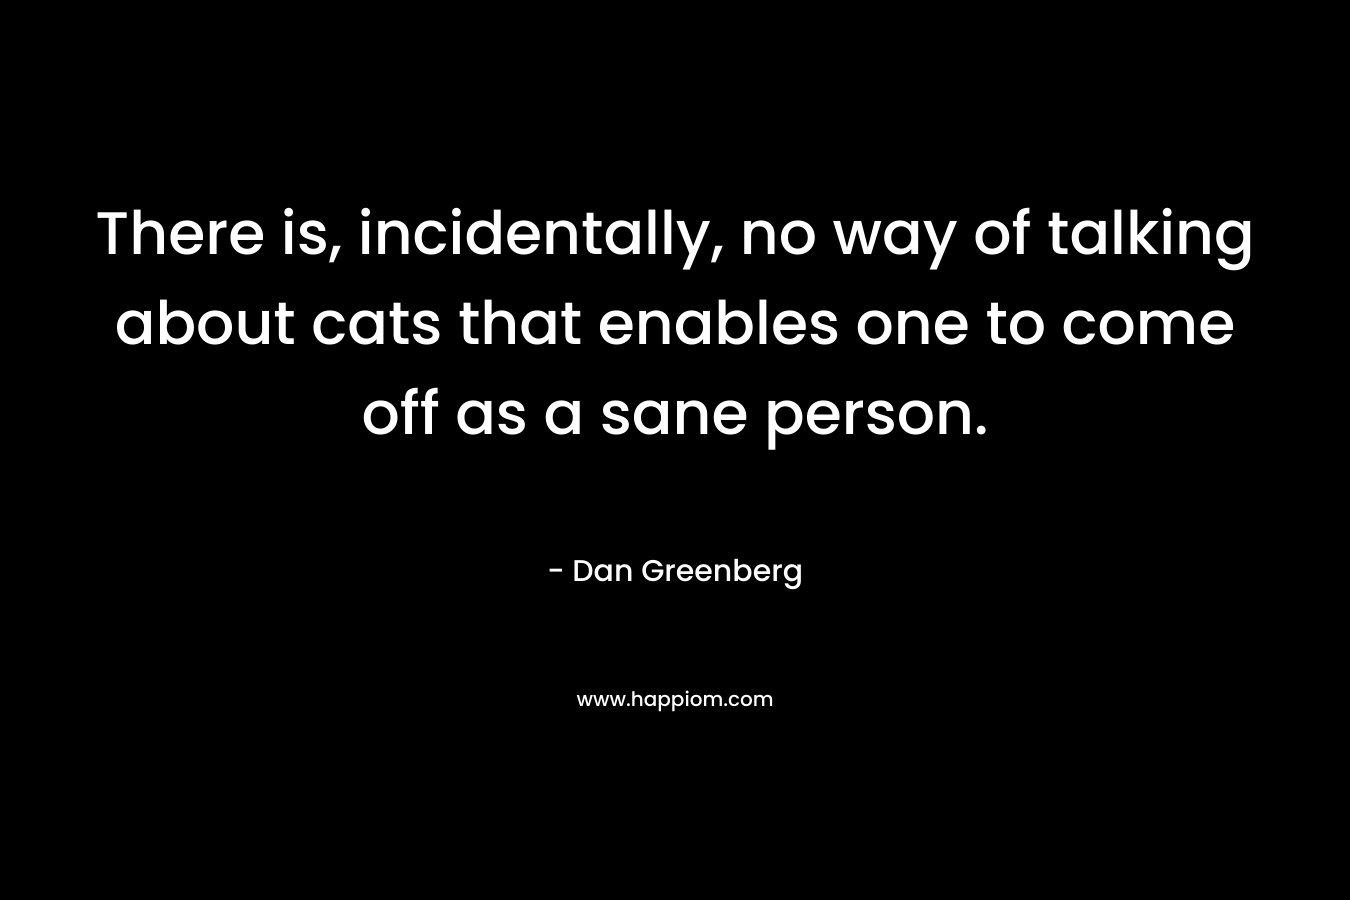 There is, incidentally, no way of talking about cats that enables one to come off as a sane person. – Dan Greenberg